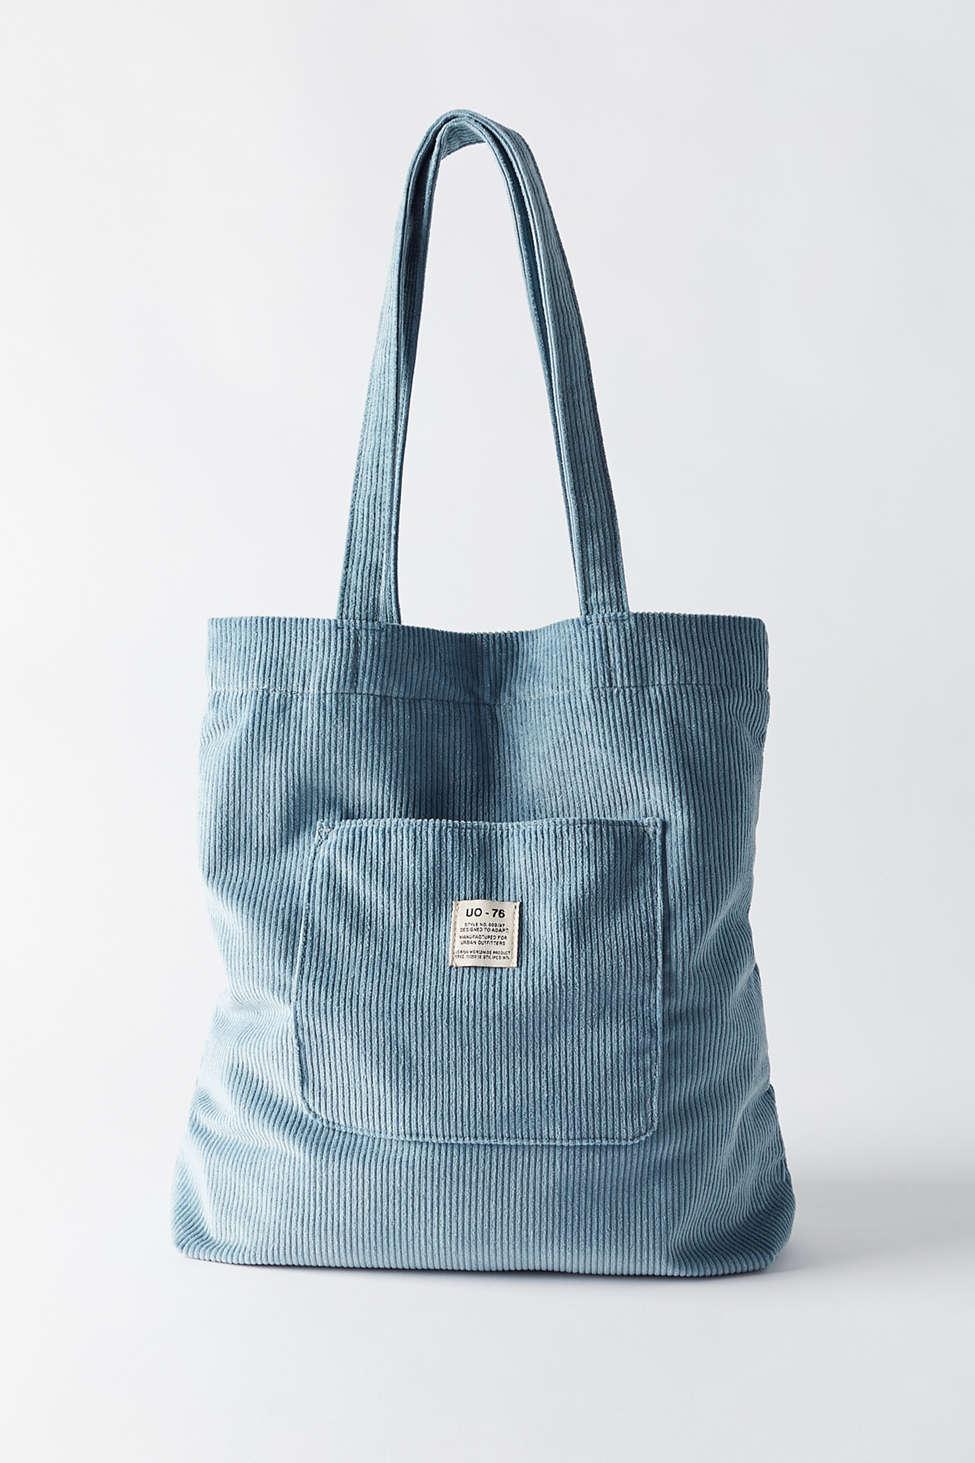 private Momentum Renaissance Urban Outfitters Uo Basic Corduroy Tote Bag in Grey (Gray) | Lyst